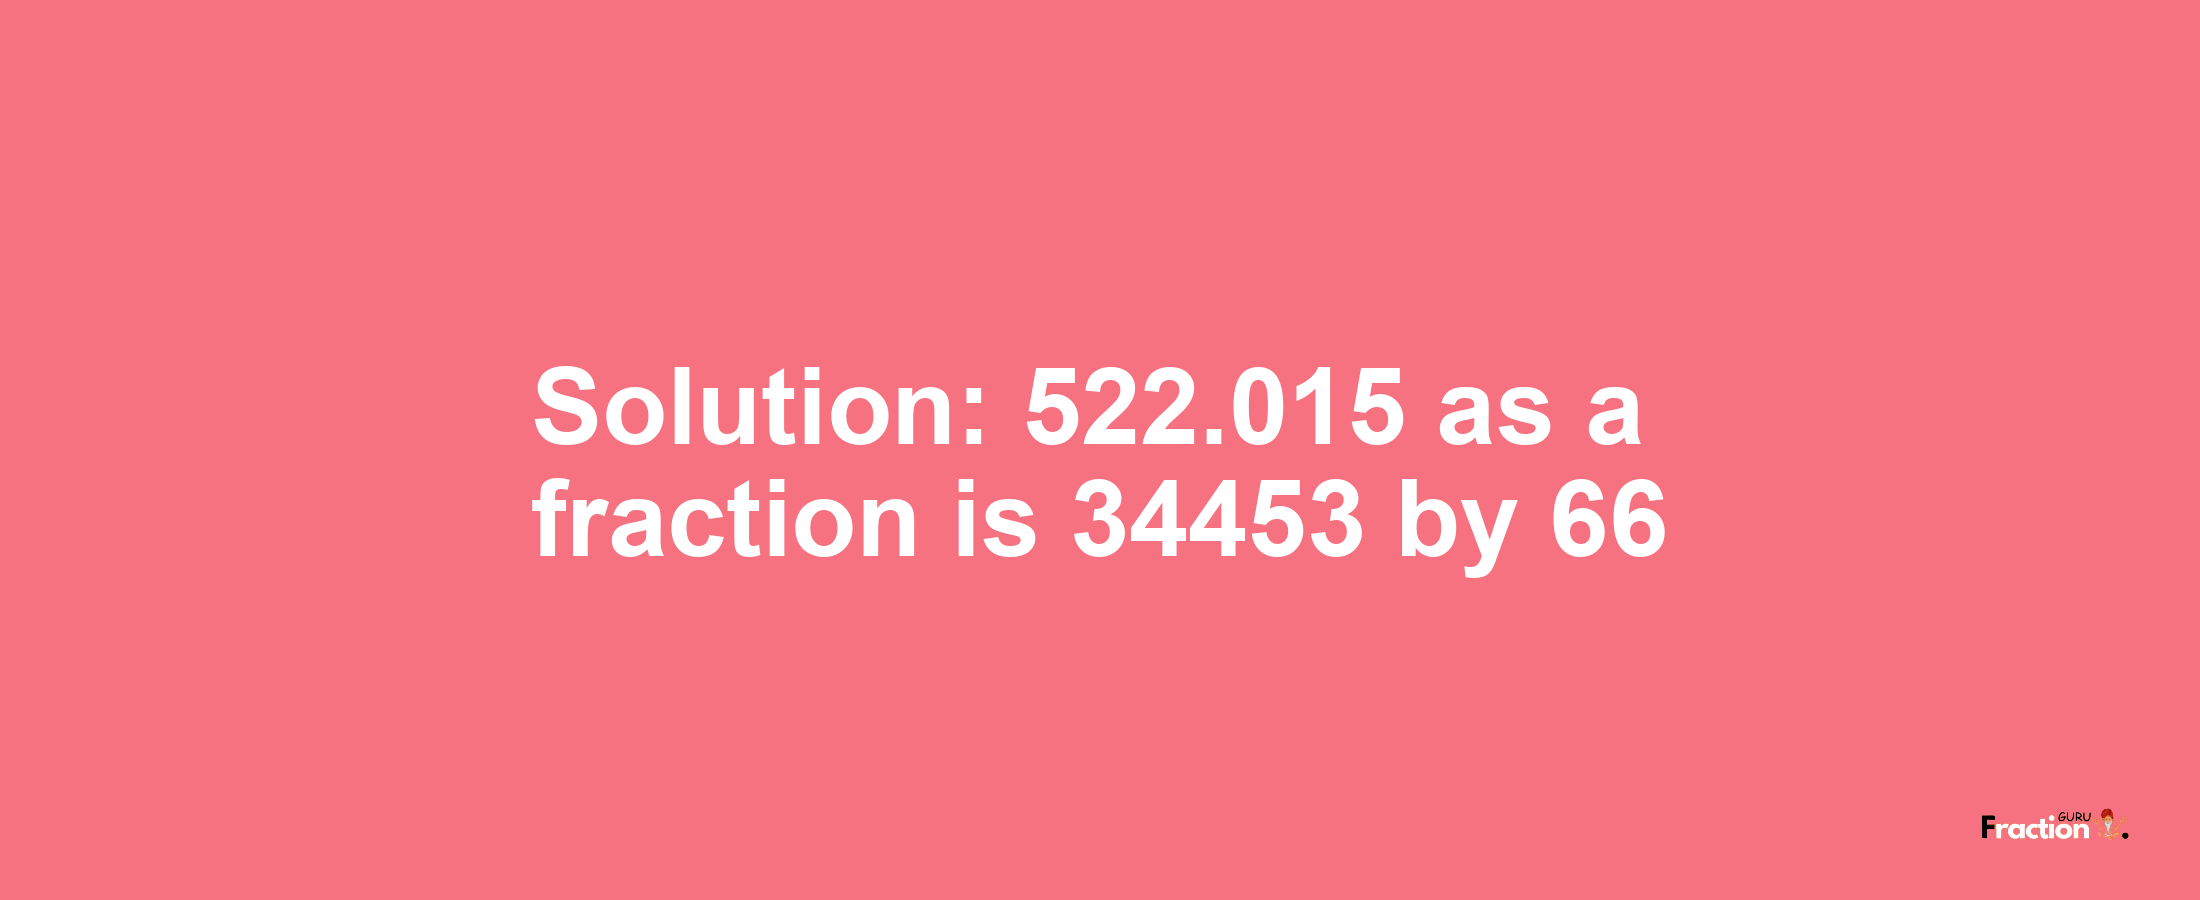 Solution:522.015 as a fraction is 34453/66